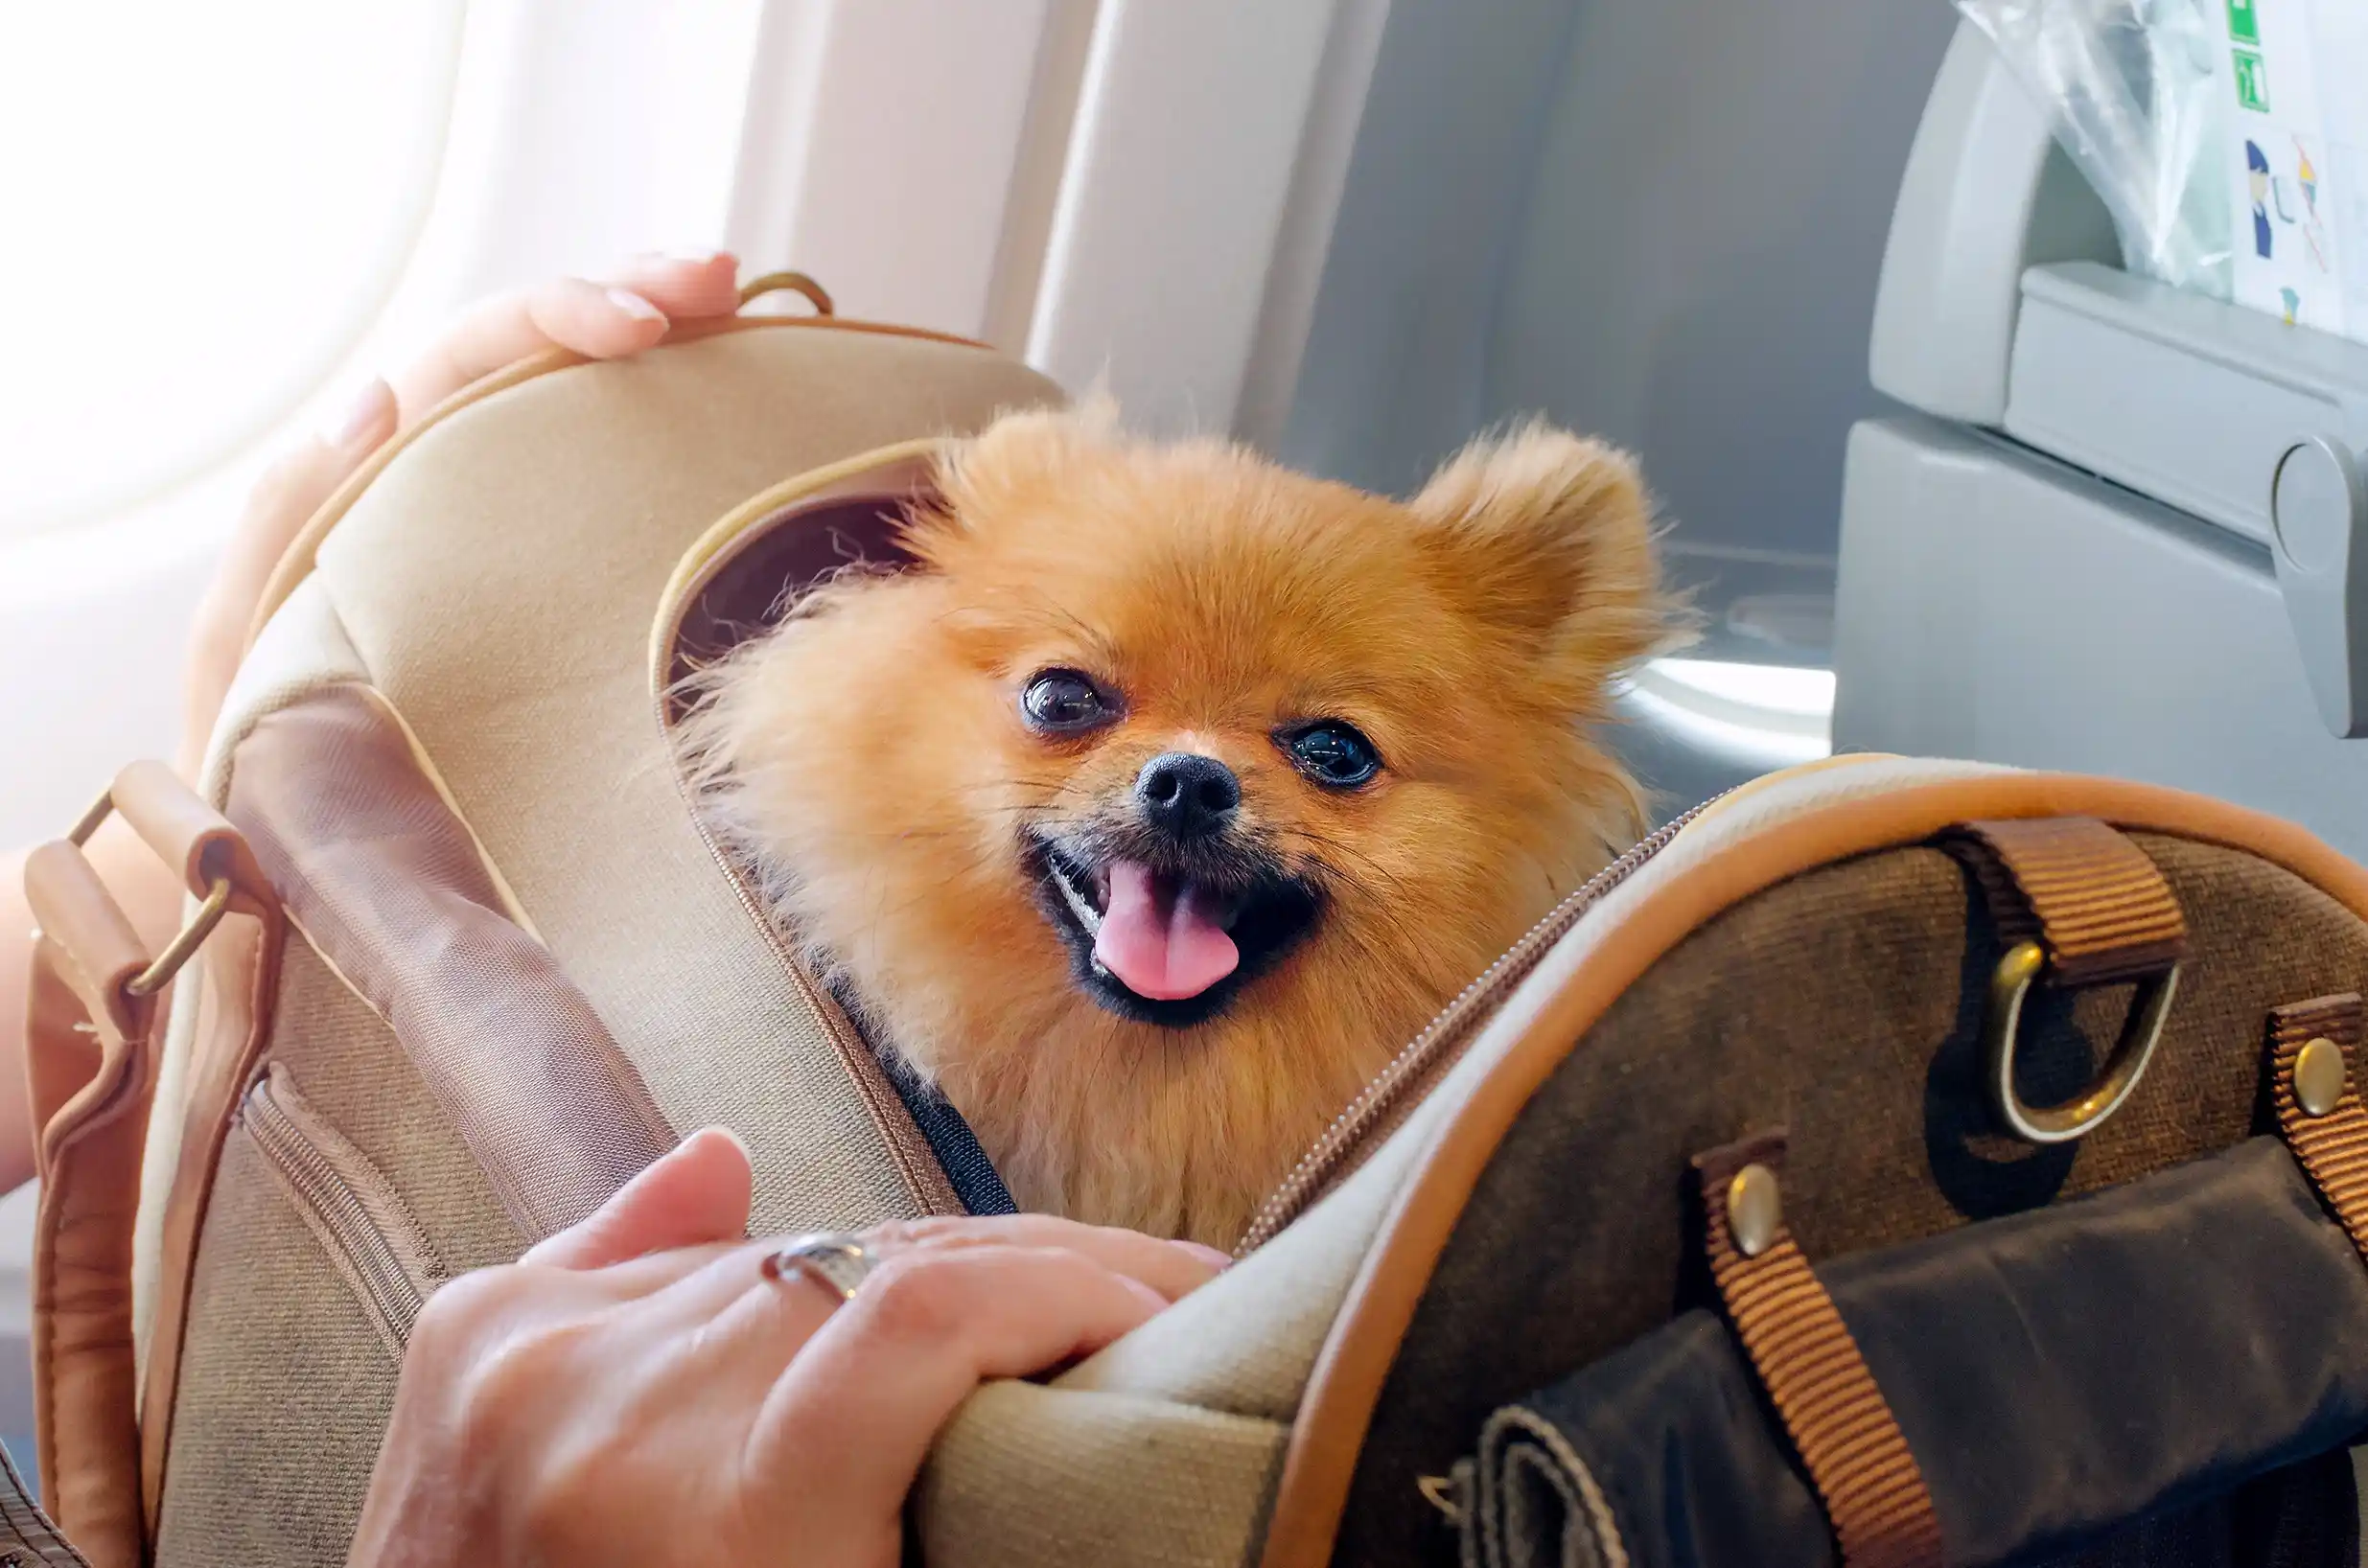 Traveling With Dog On Plane? Here’s What You Need To Know